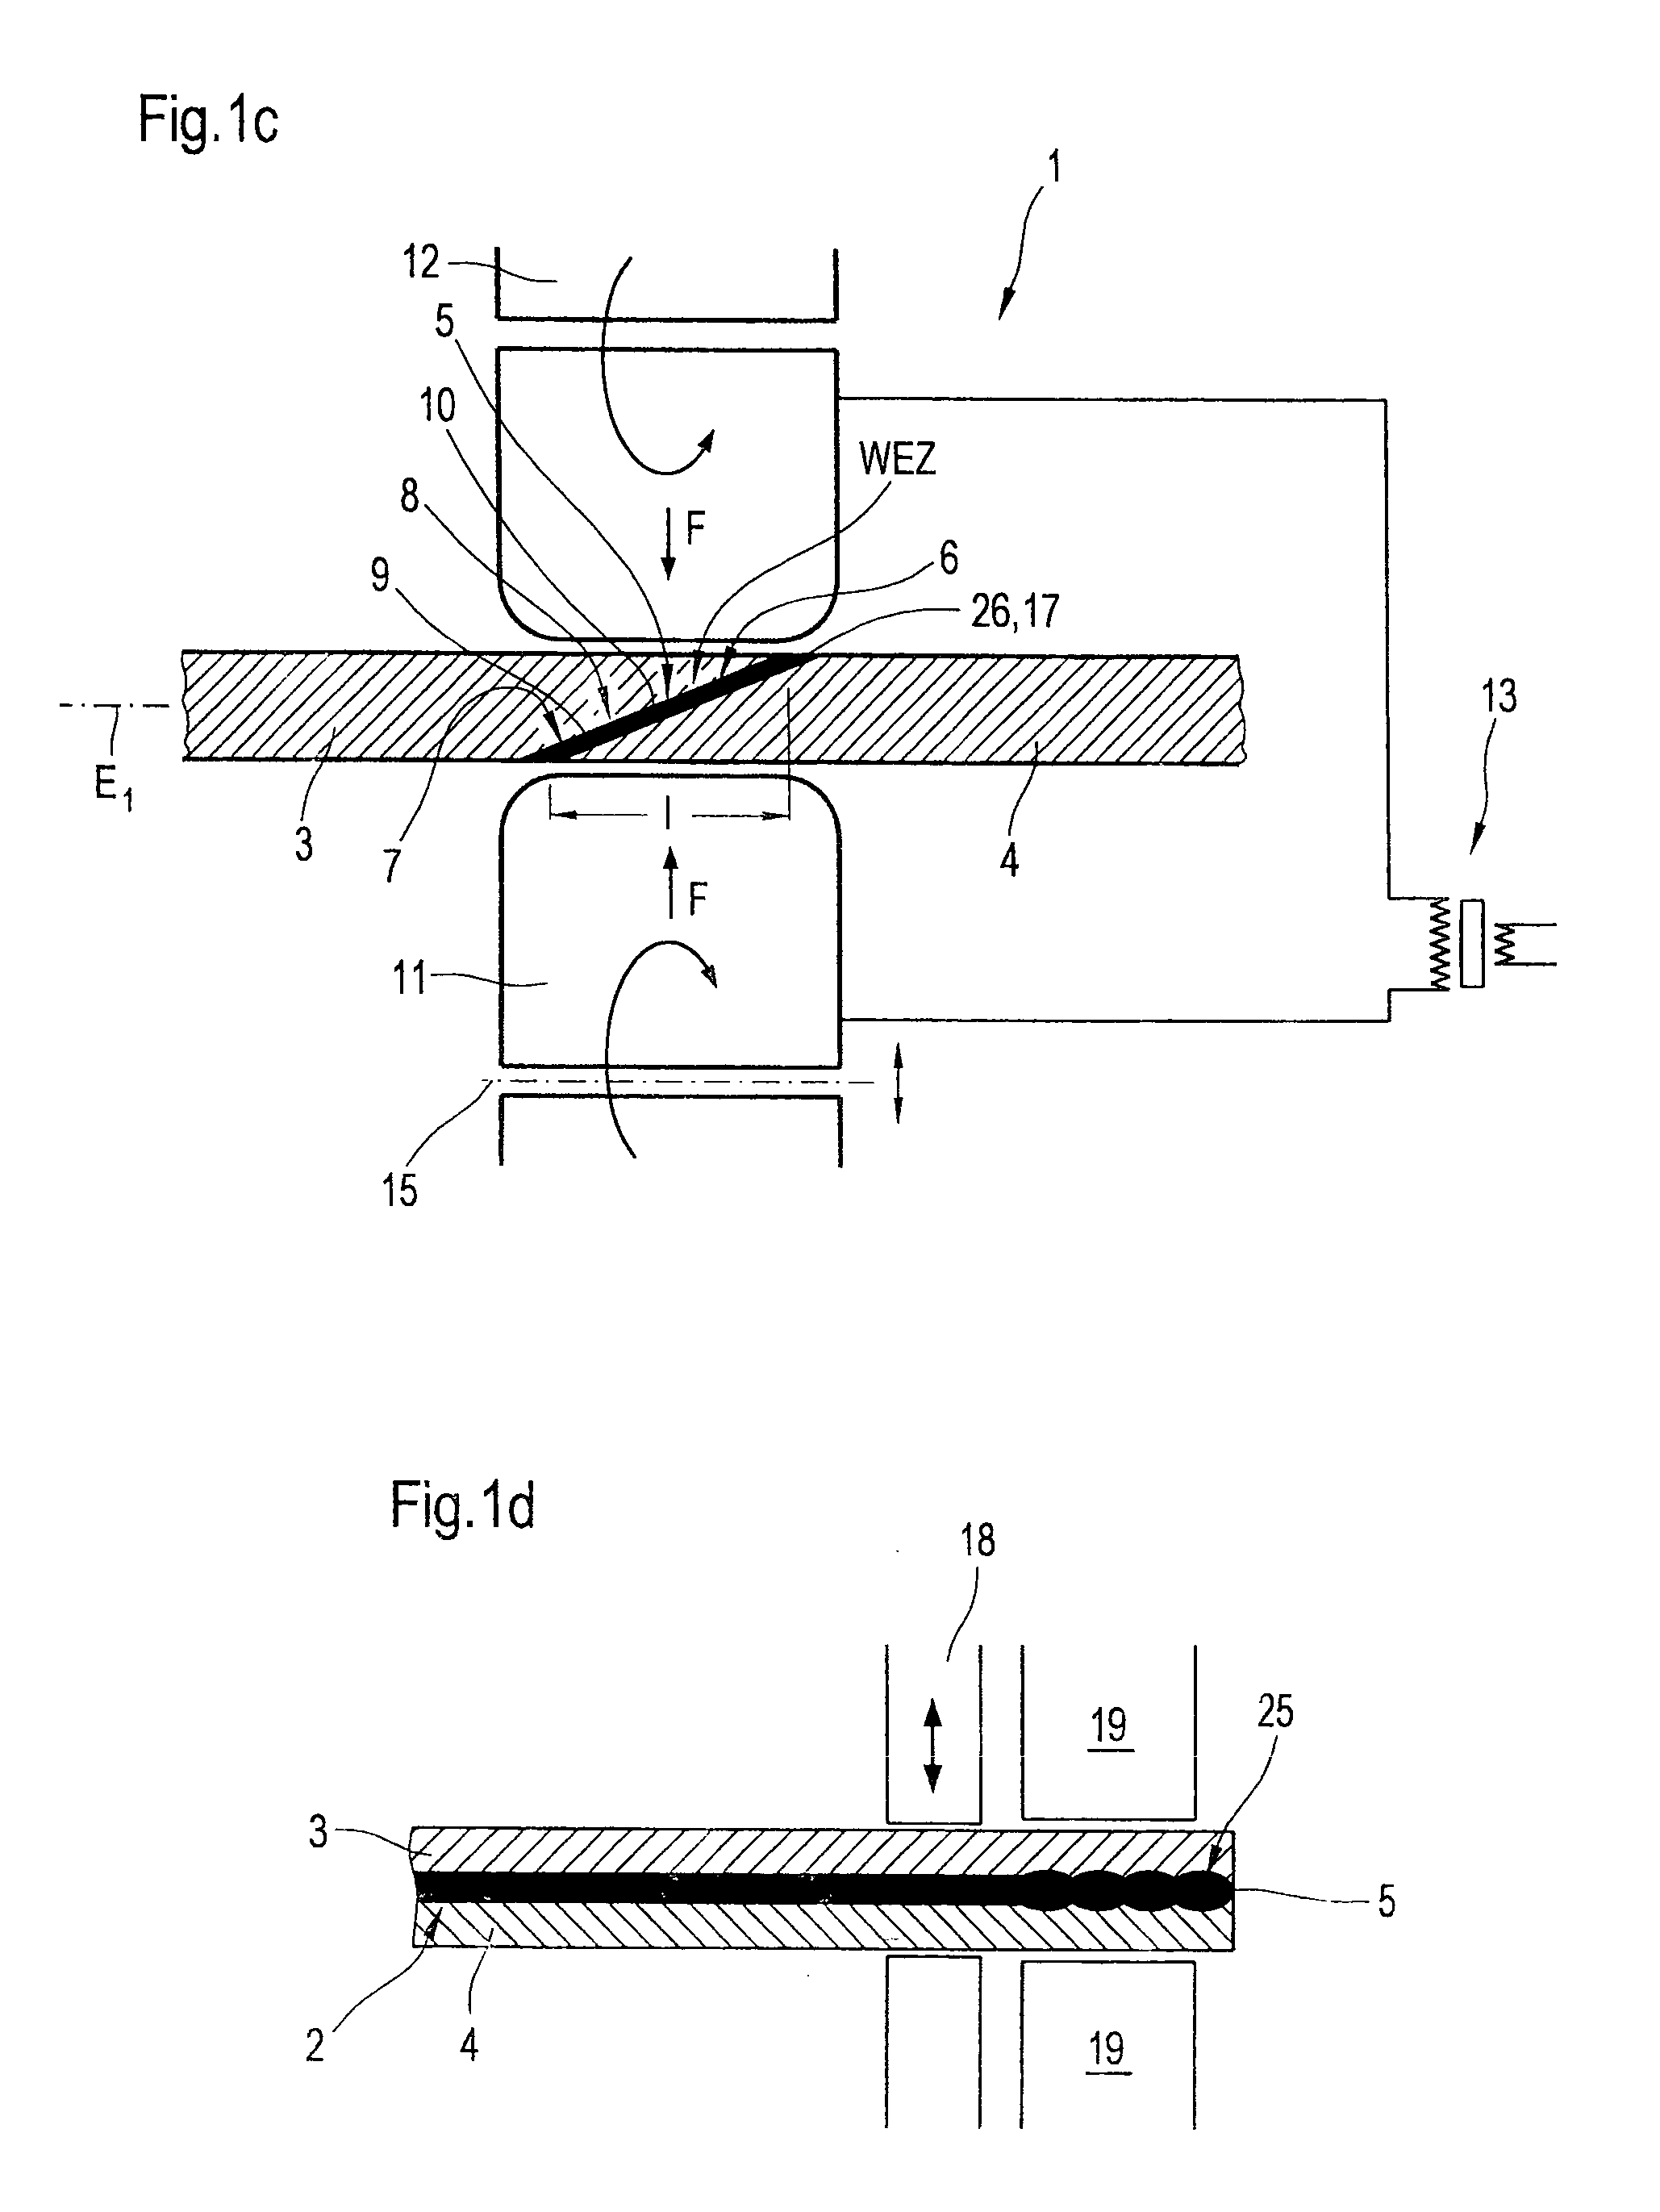 Method for producing permanent integral connections of oxide-dispersed (ODS) metallic materials or components of oxide-dispersed (ODS) metallic materials by welding